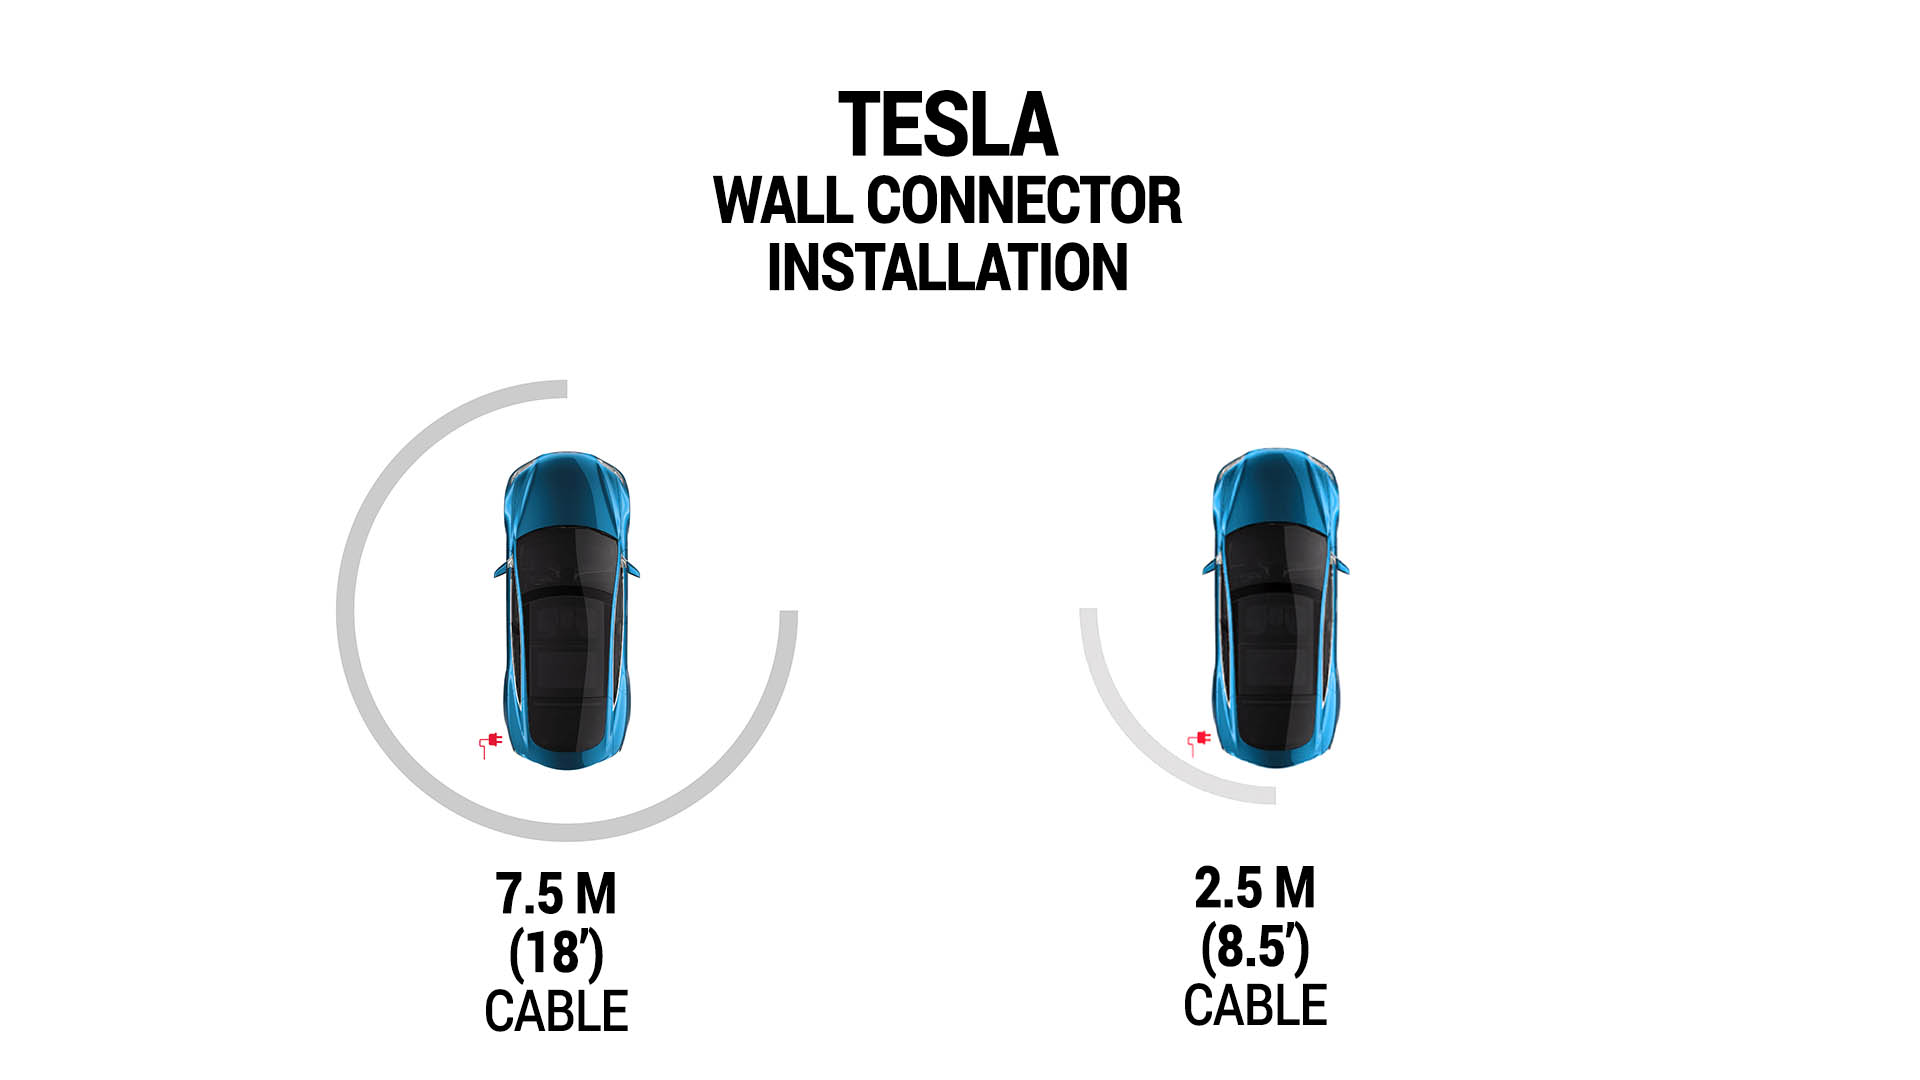 How to Install Tesla Wall Connector Gen 3 - Step By Step Guide - TESBROS  BLOG